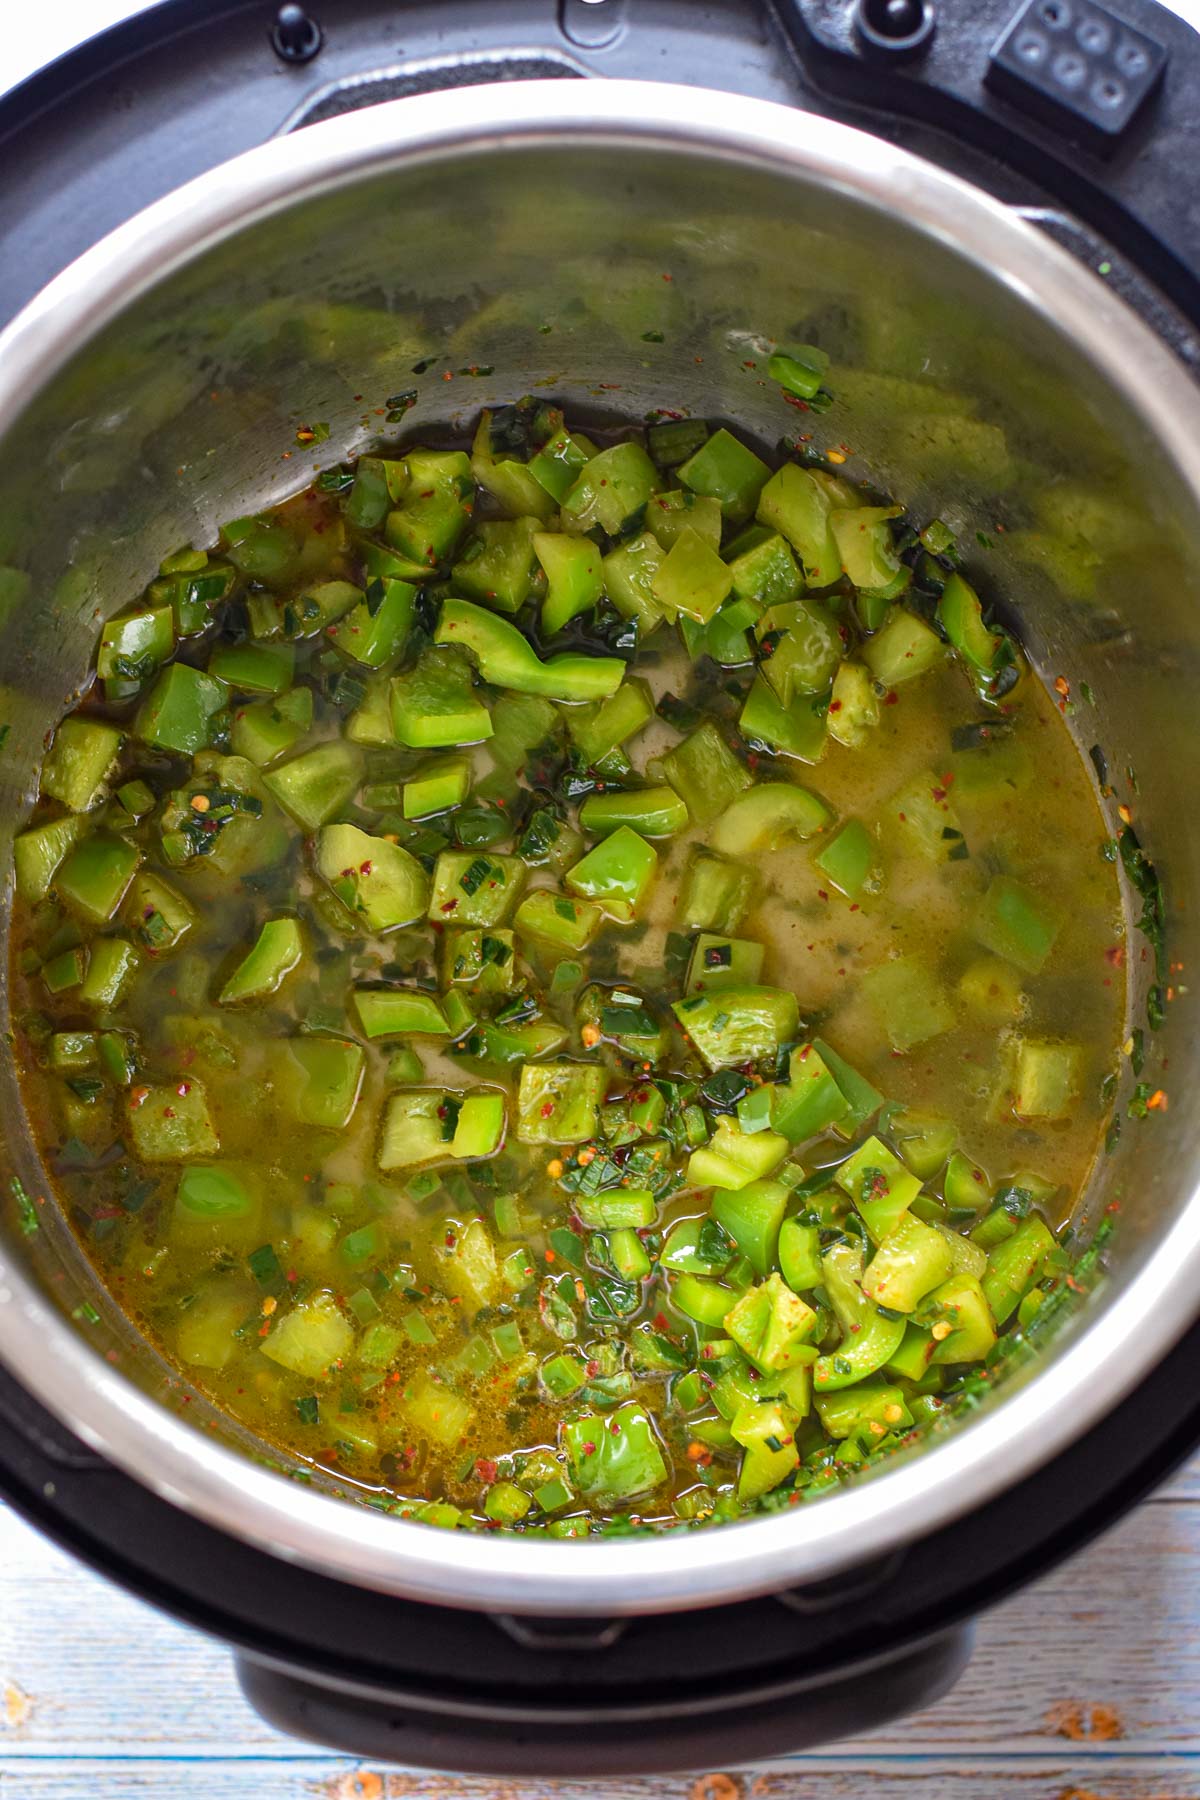 process shot of after water, vinegar and lime juice is added to the sautéed peppers and leeks